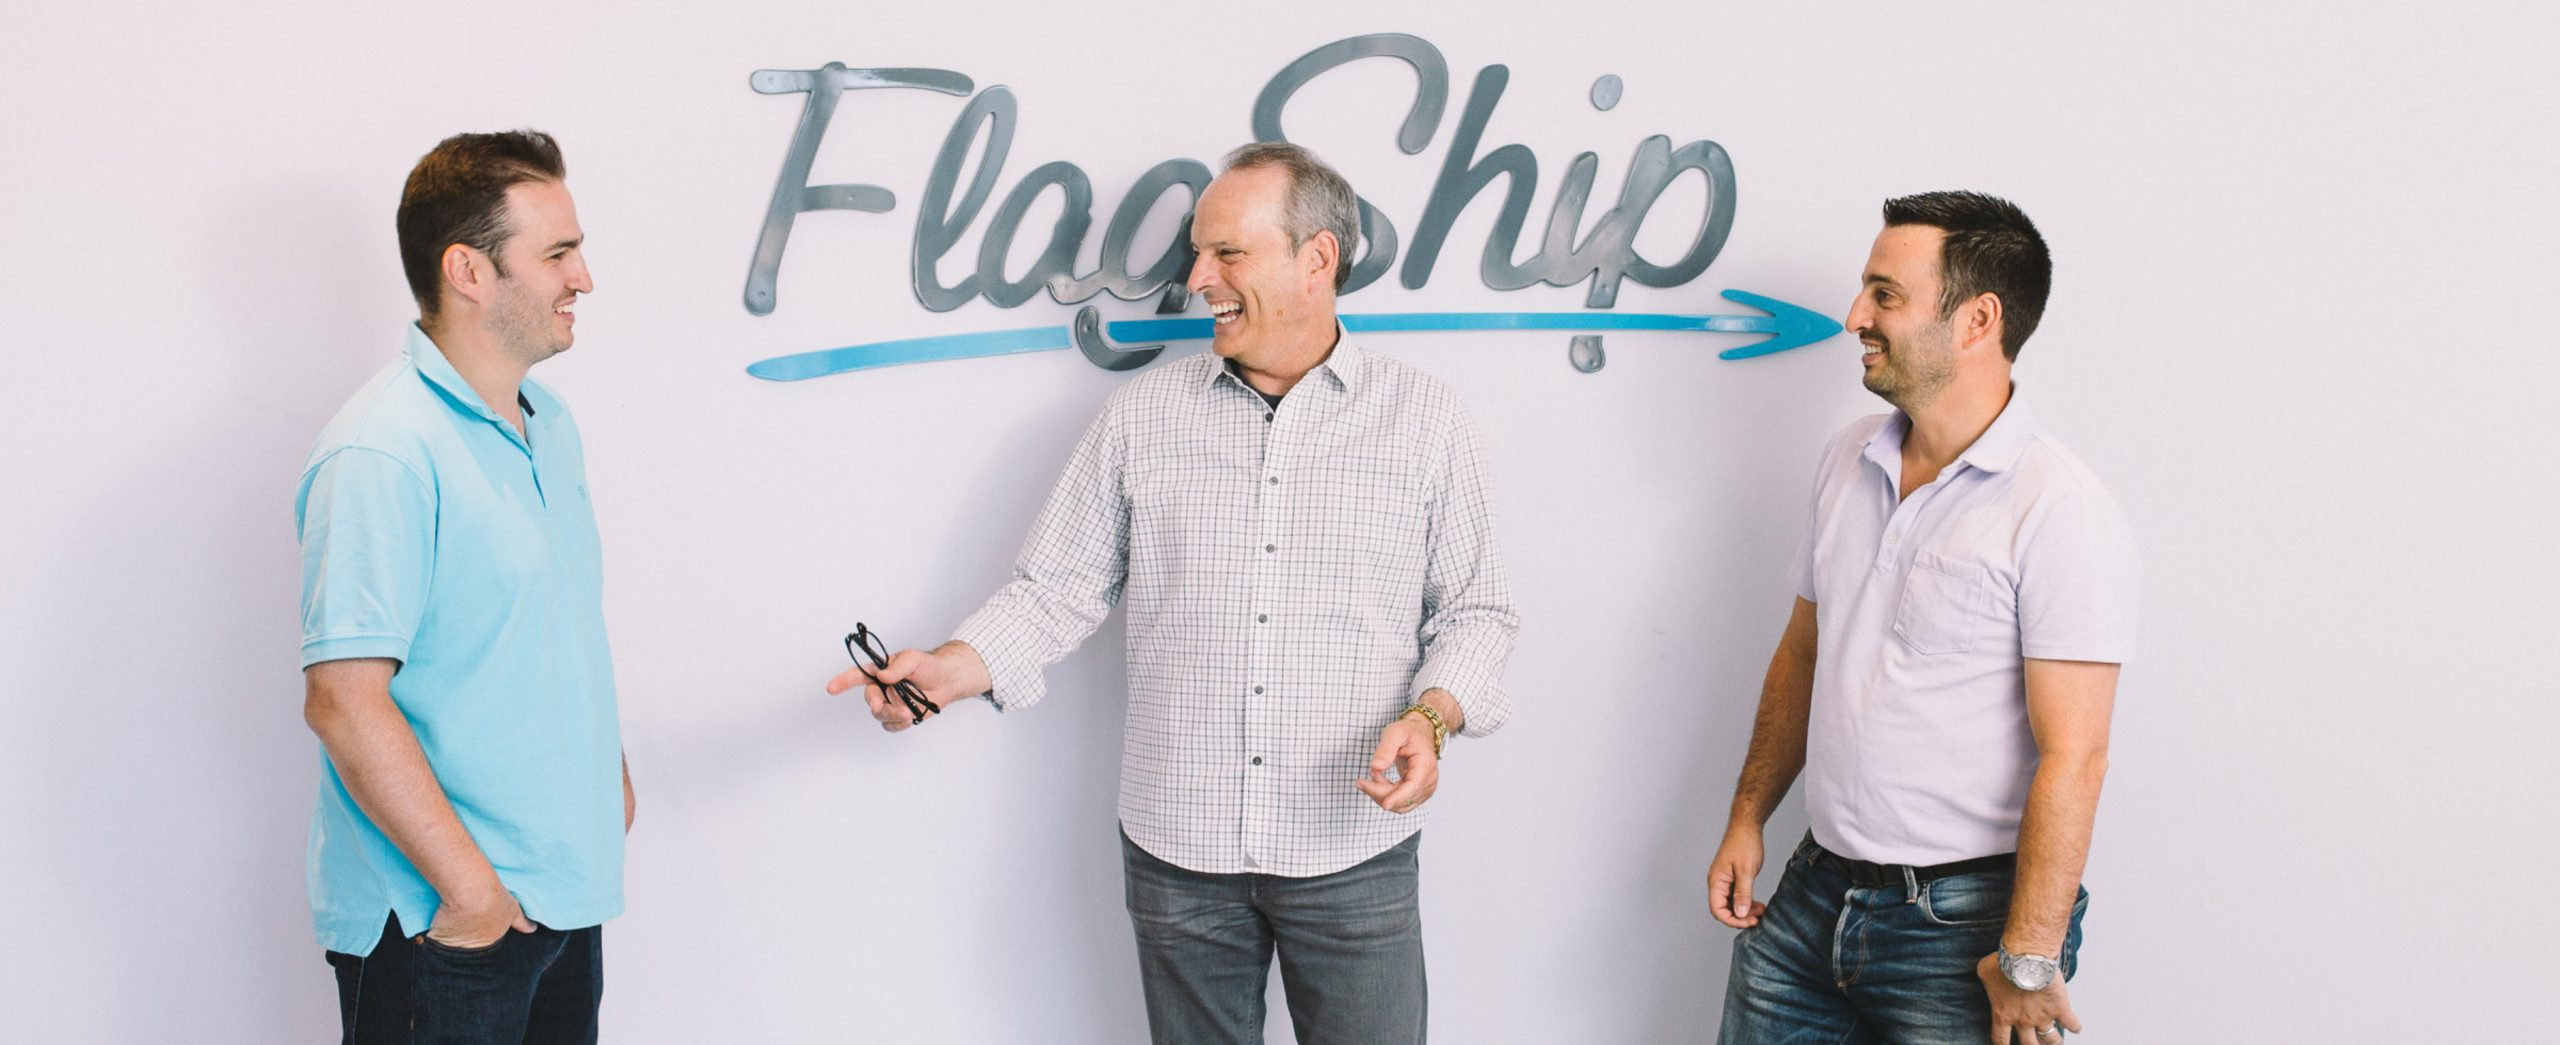 Flagship Kruger Family Scaled Https://Www.flagshipcompany.com